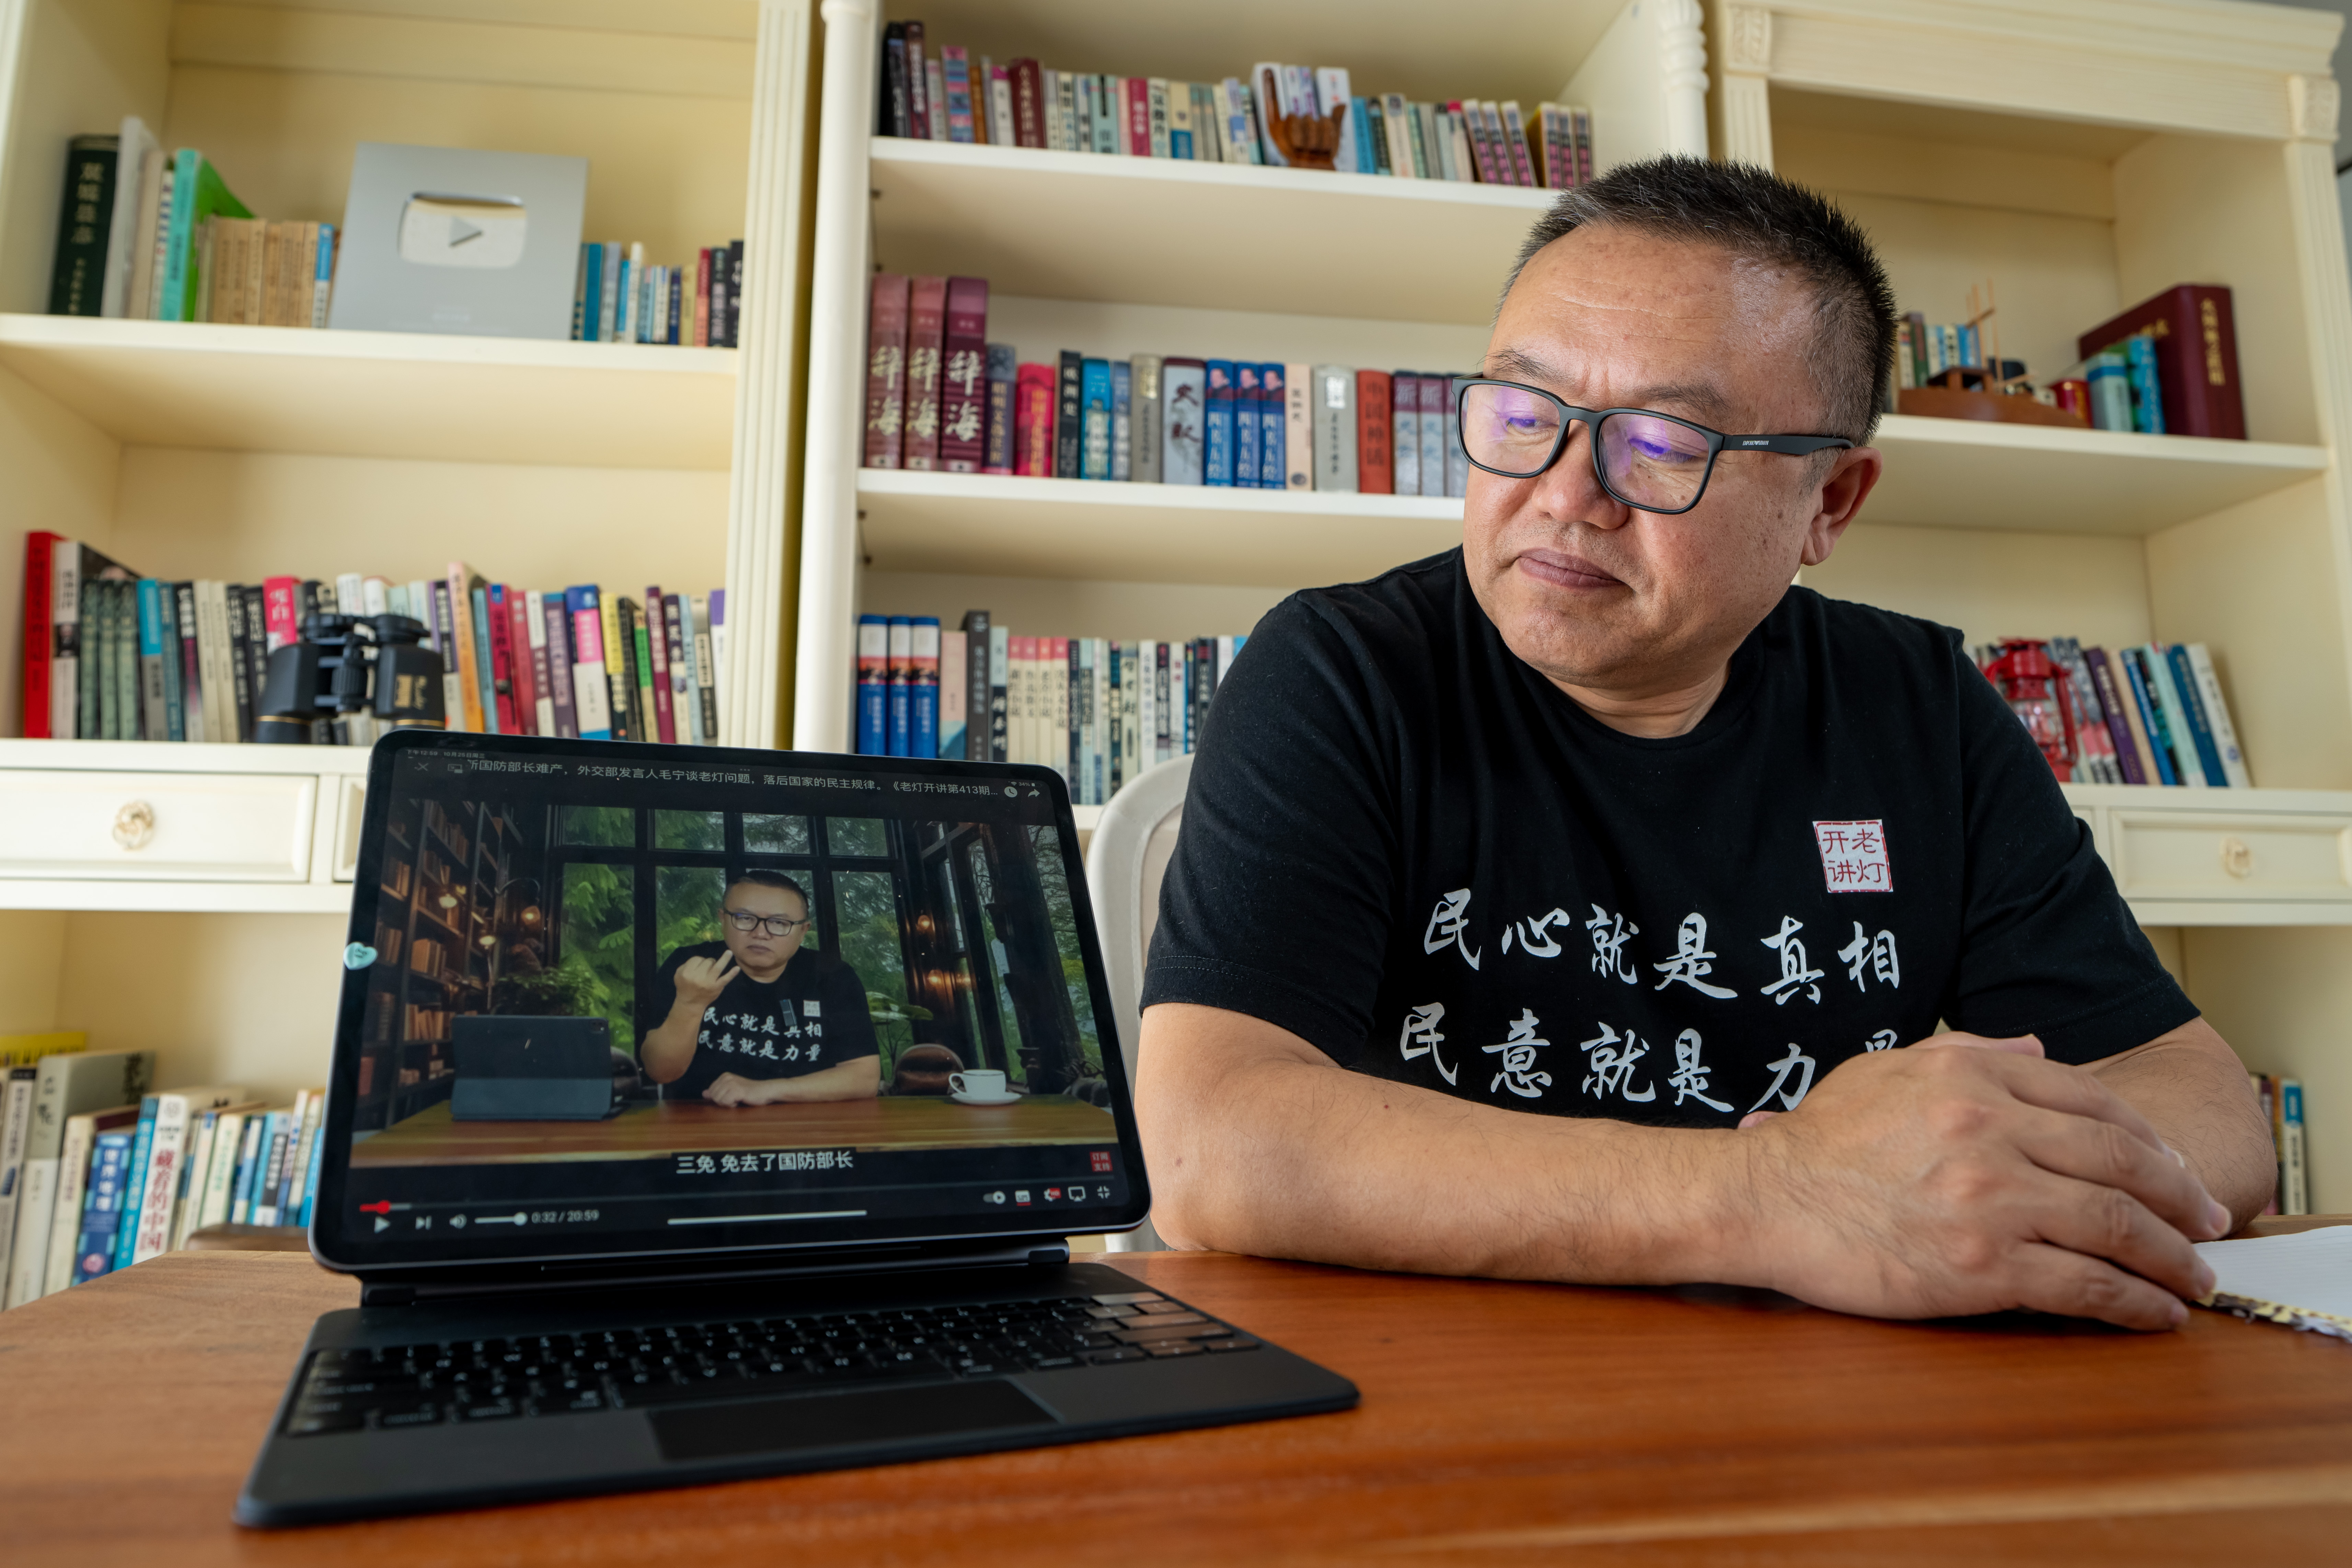 B.C. man alleges he was targeted by China’s ‘spamouflage’ campaign